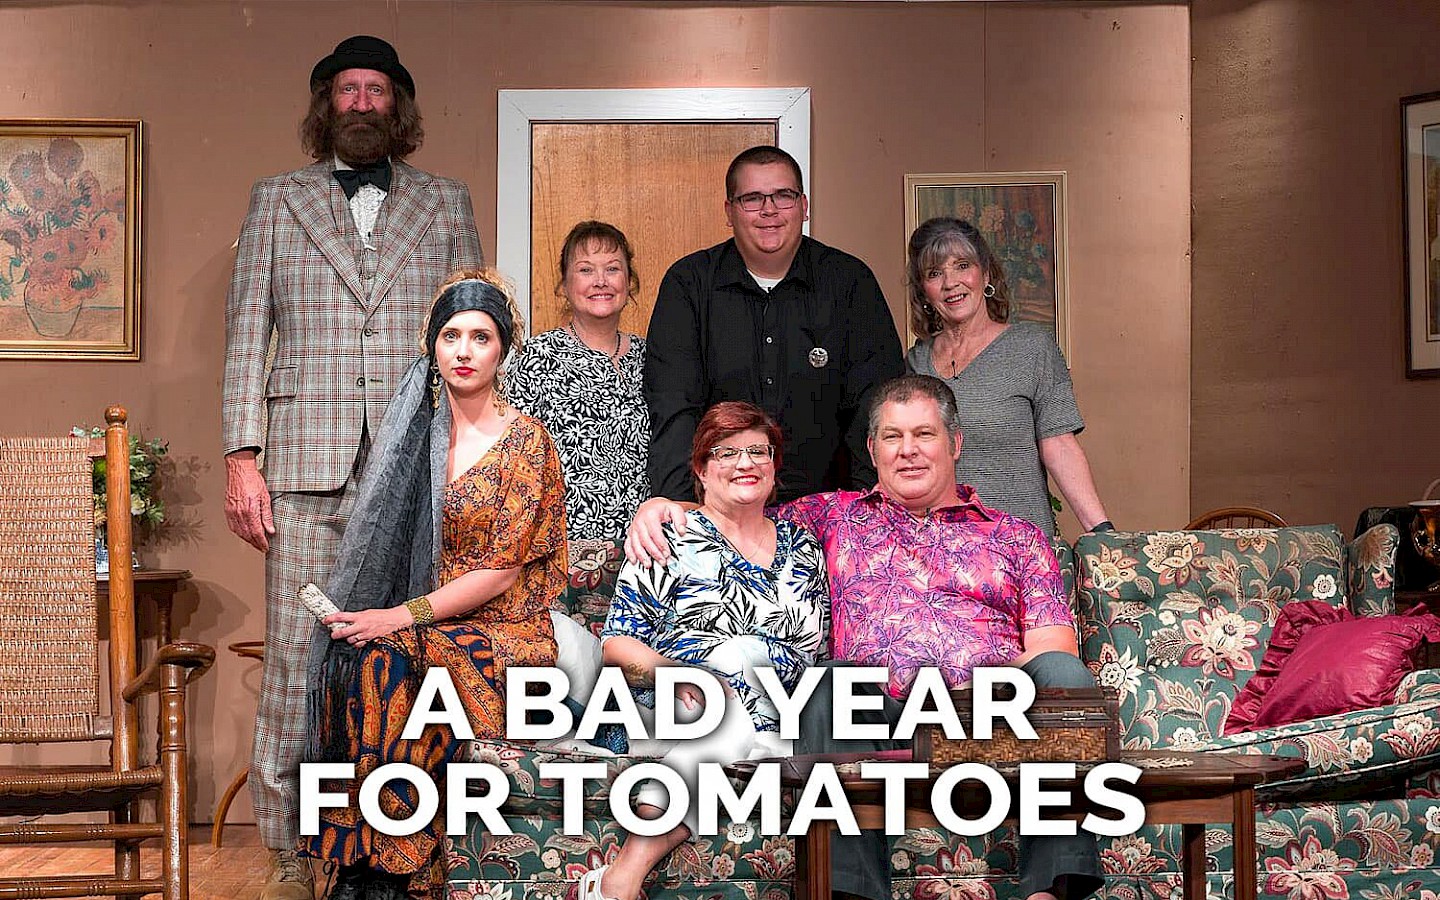 stage performers, a bad year for tomatoes